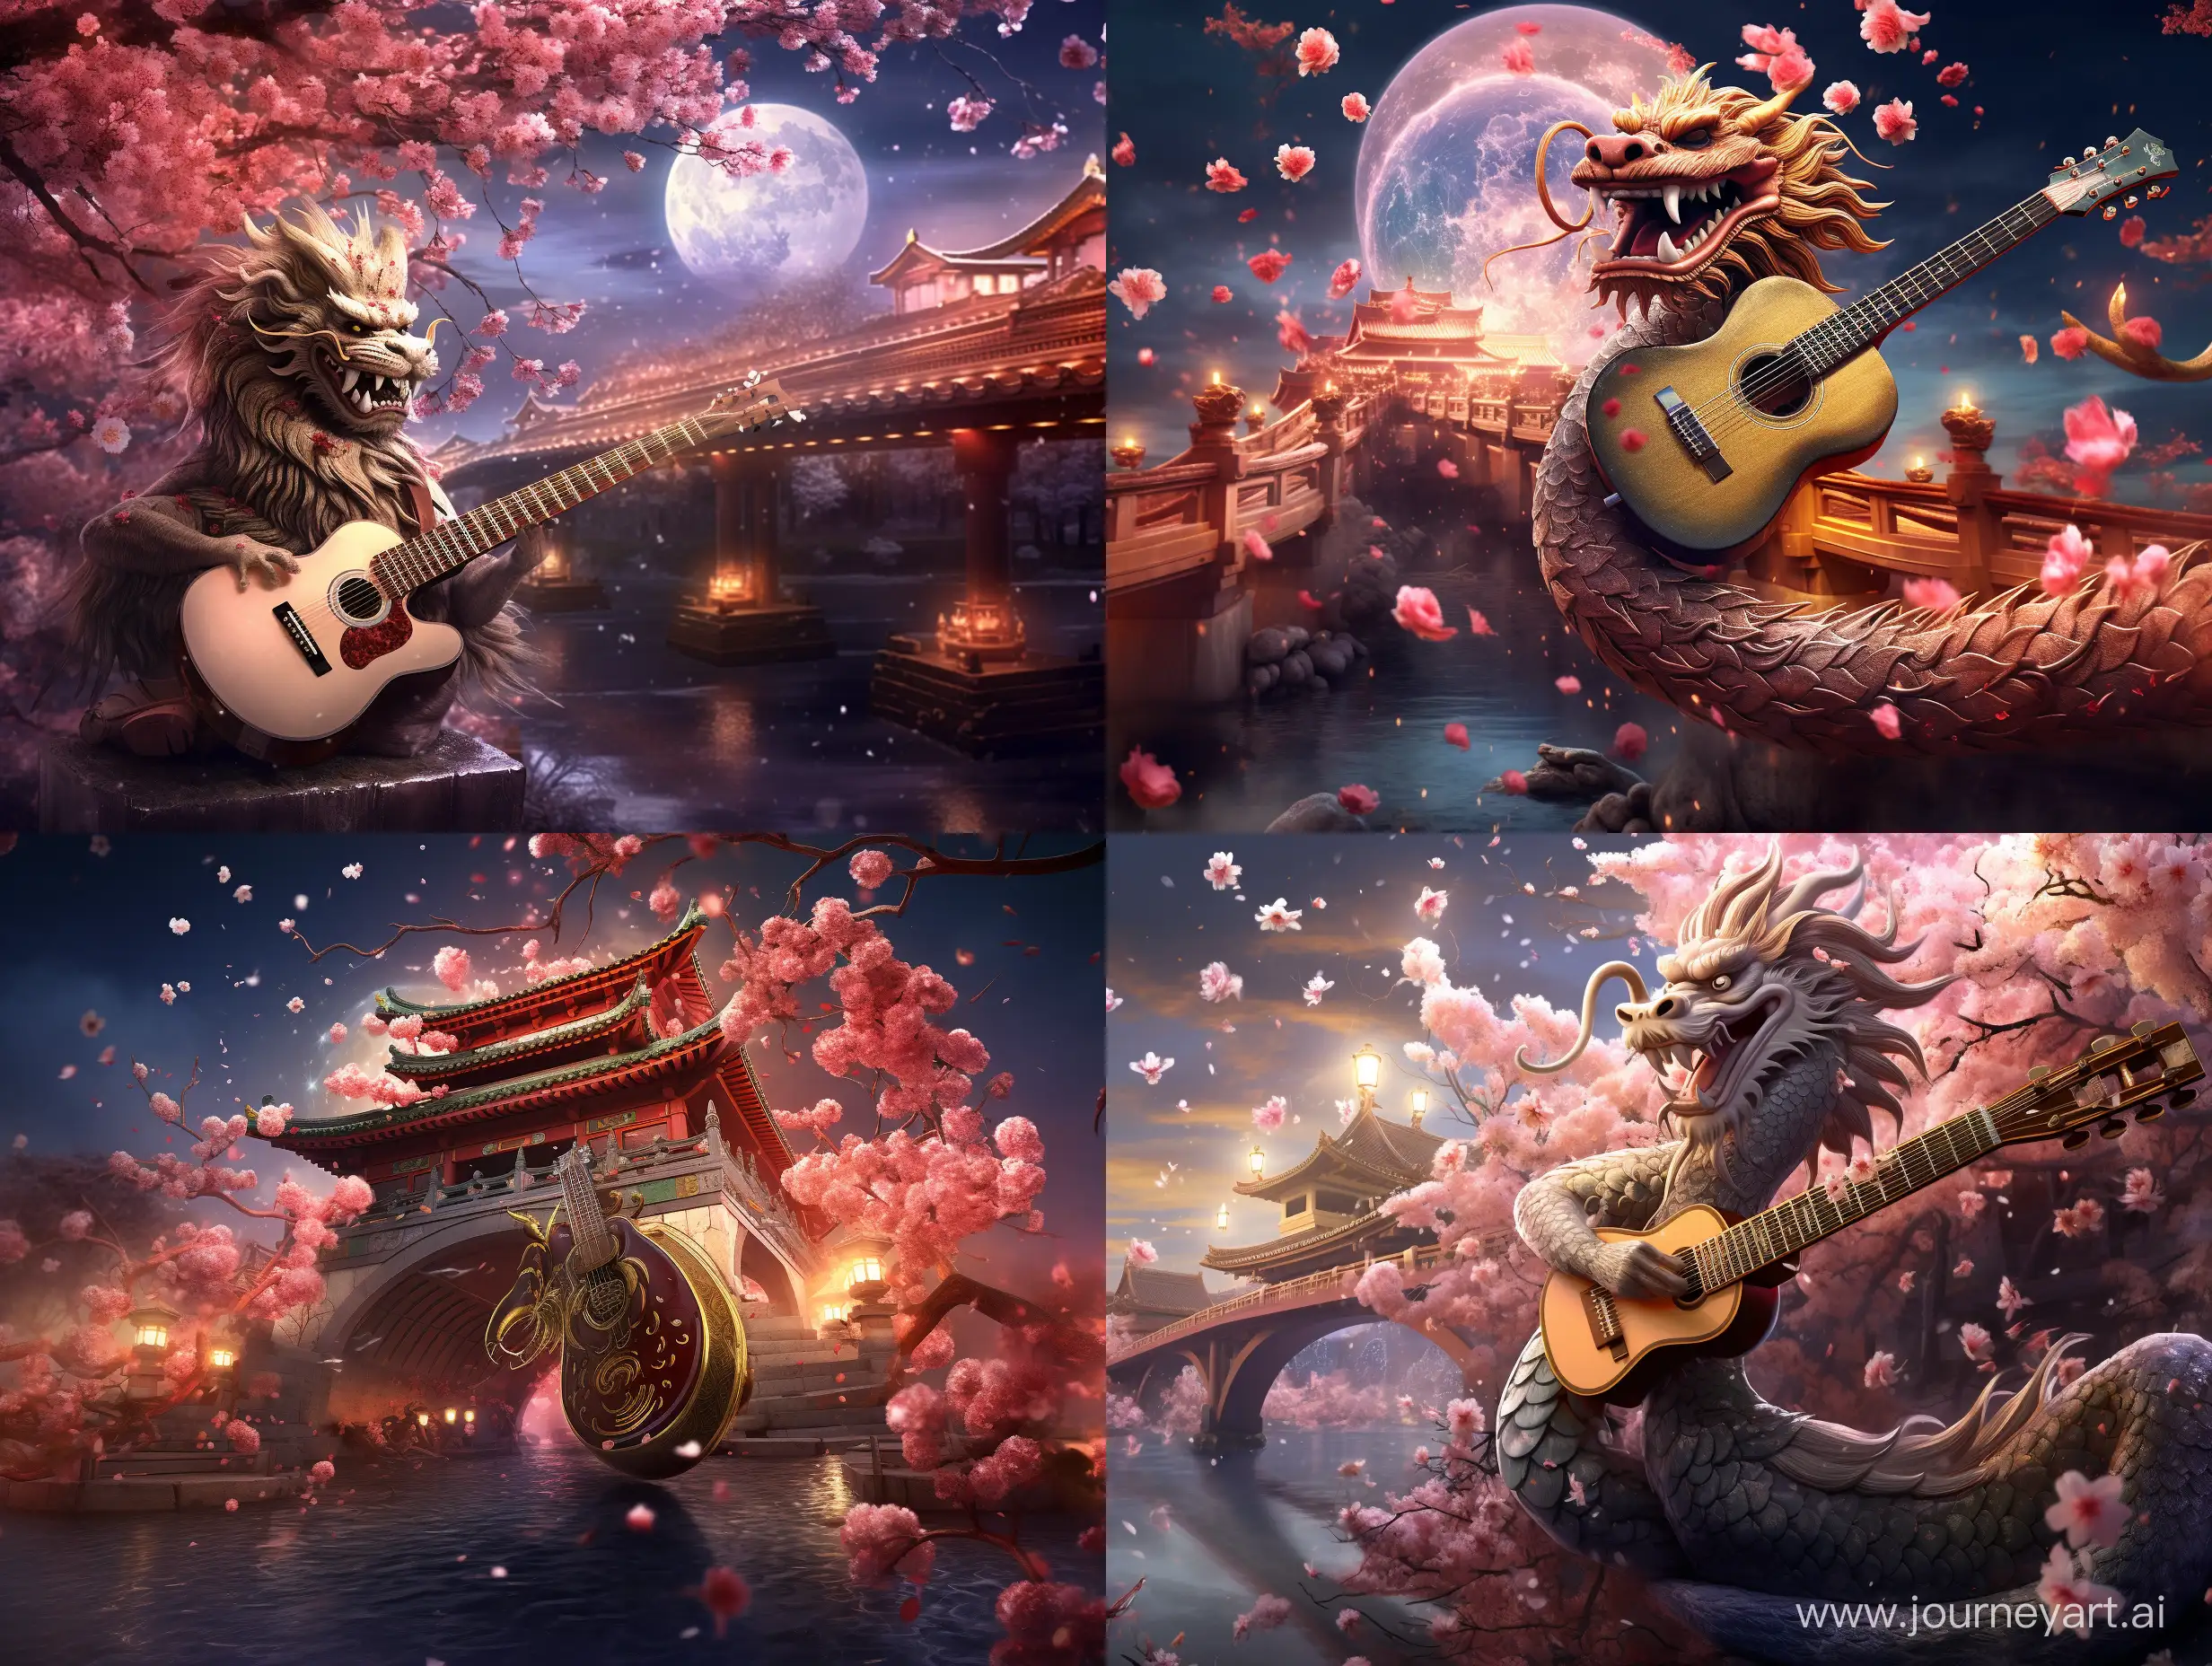 a chinese dragon playing guitar by an asian bridge, new year fireworks in the sky, cherry blossom everywhere